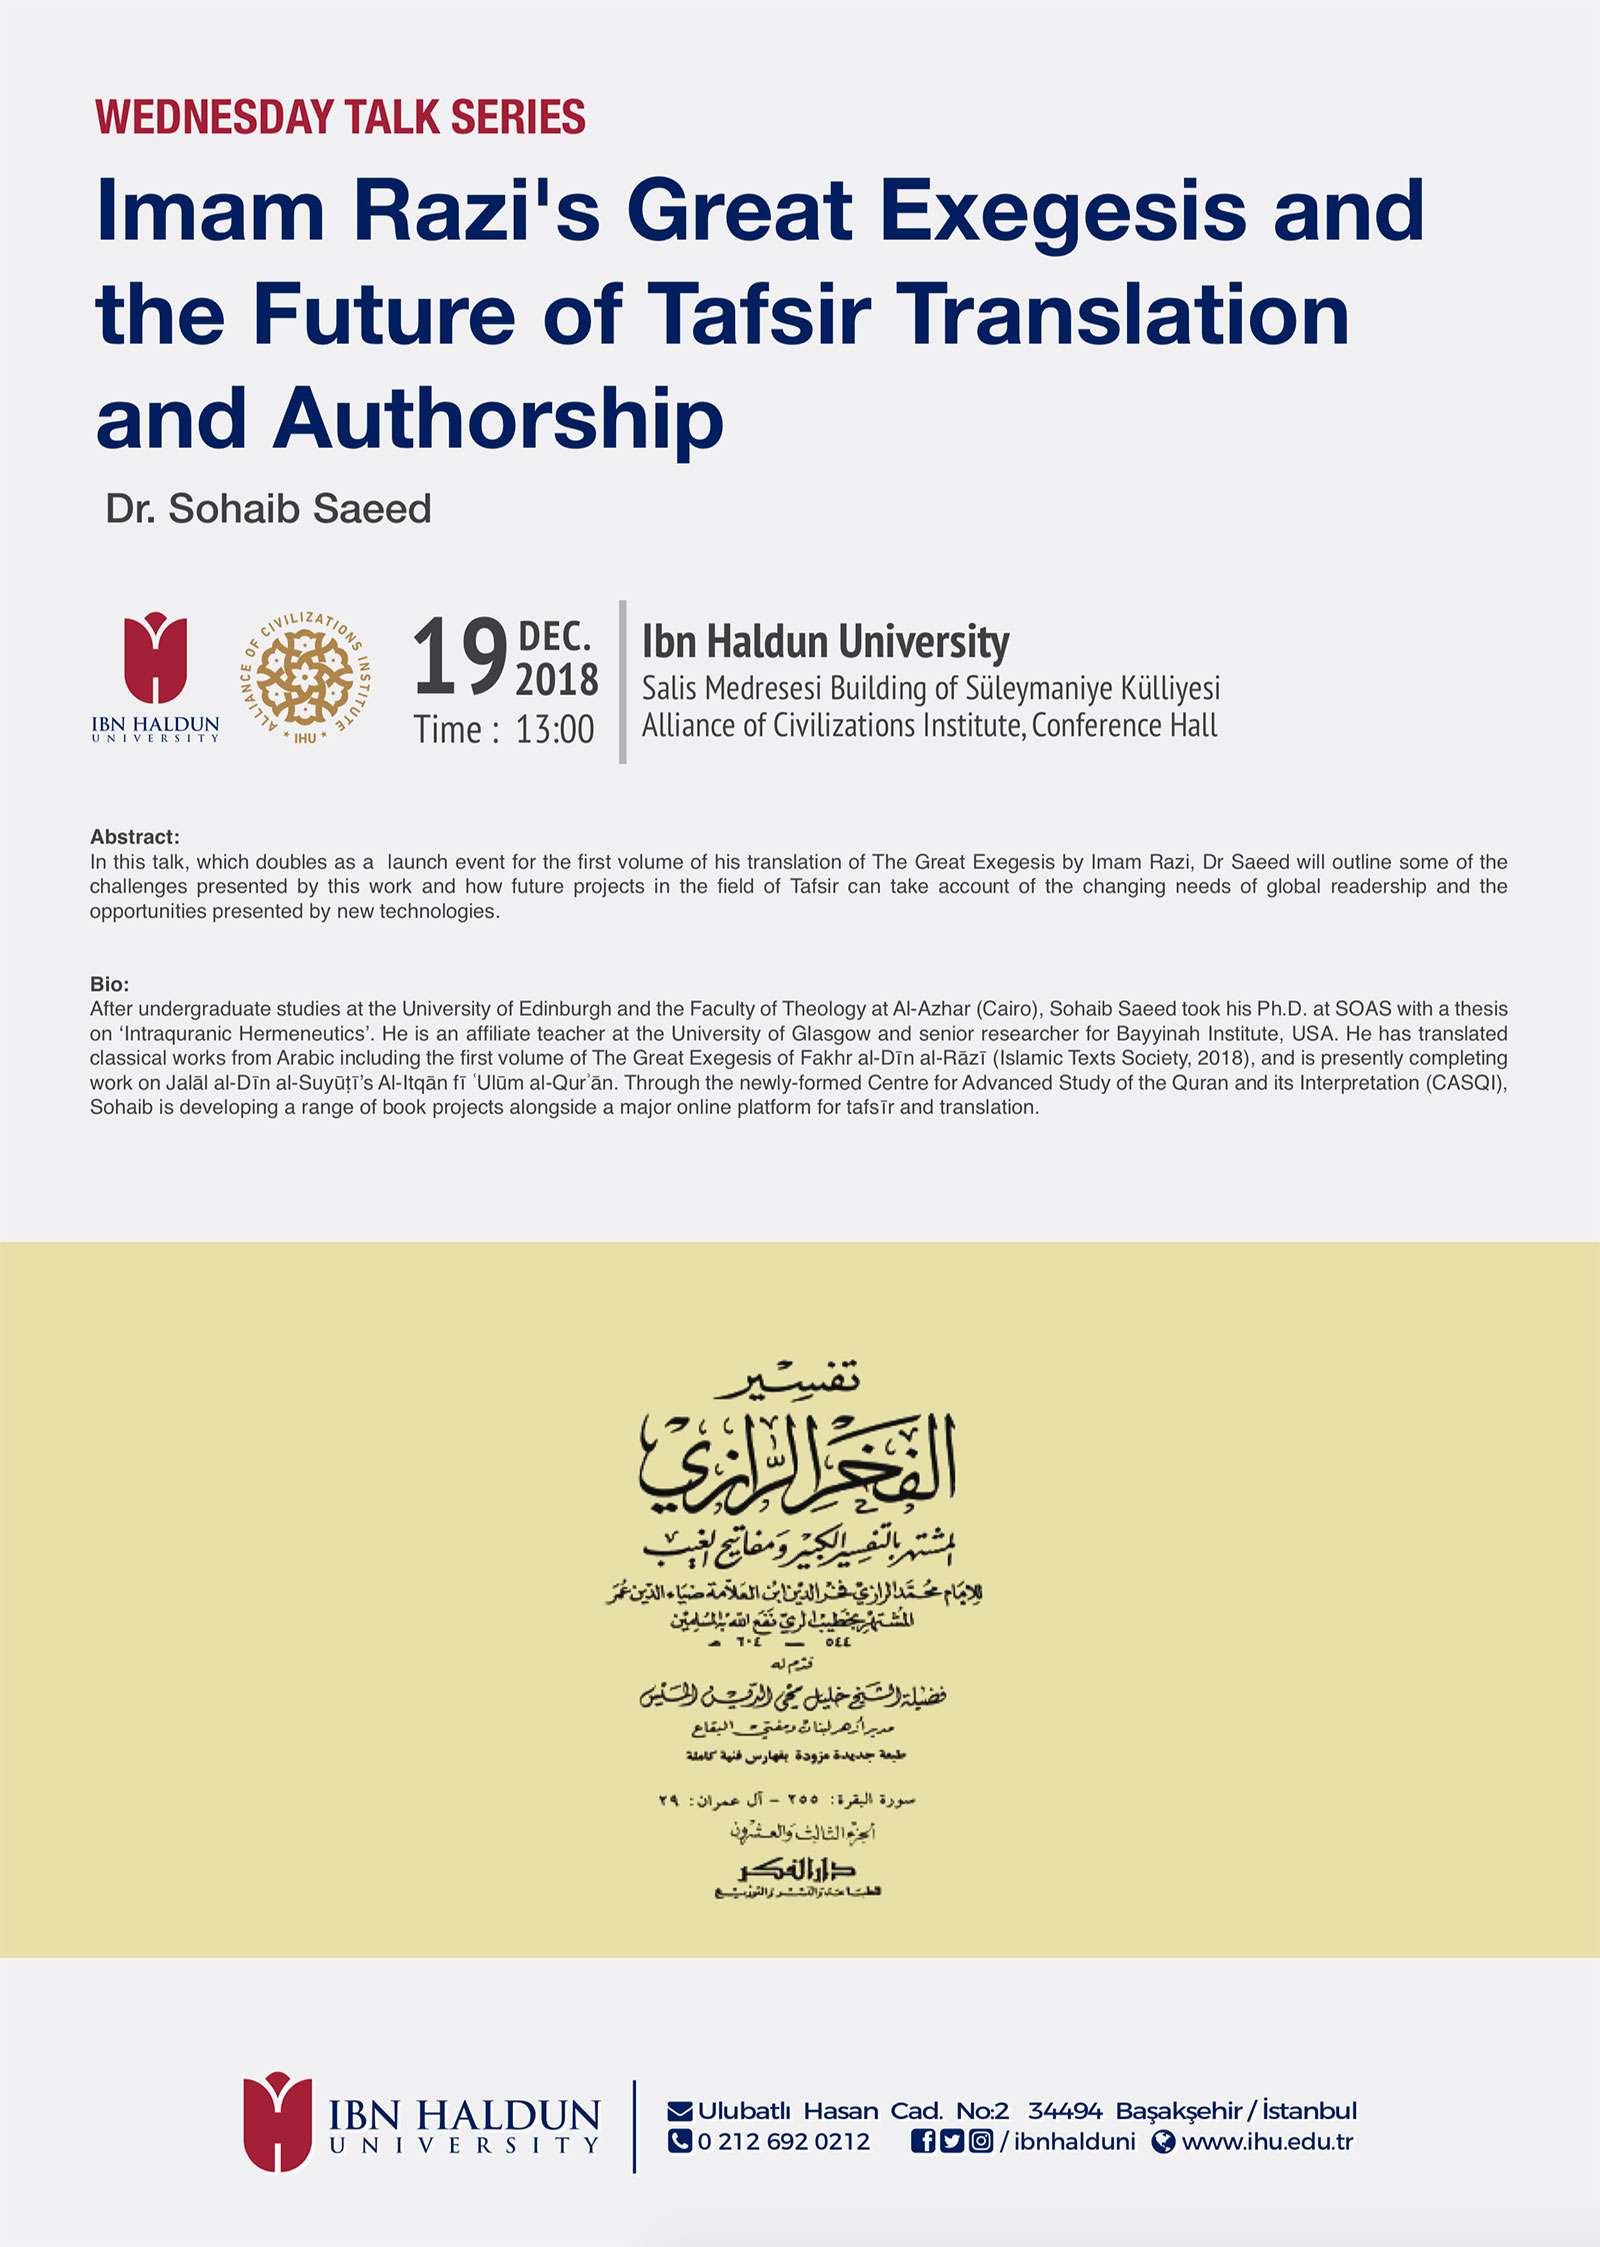 Imam Razi's Great Exegesis and the Future of Tafsir Translation and Authorship